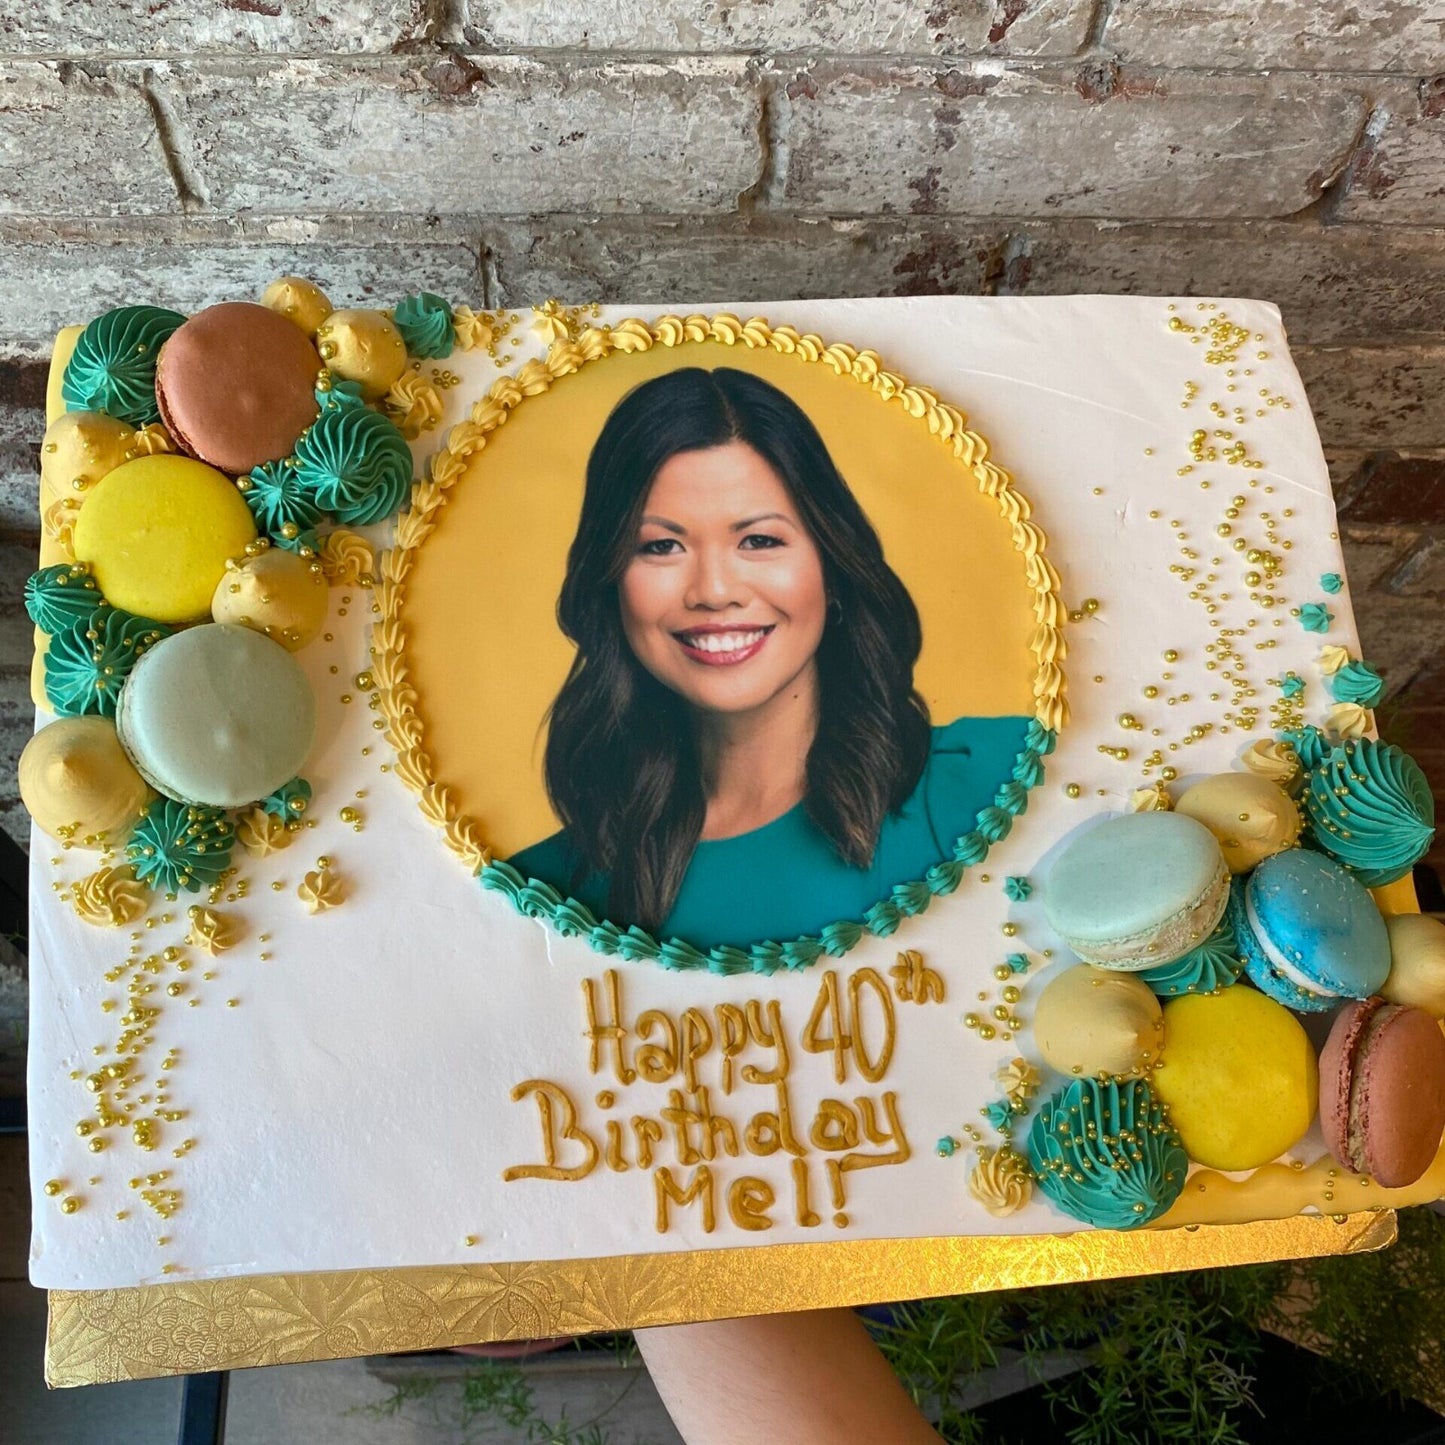 Sheet cake with photo image of person and macarons